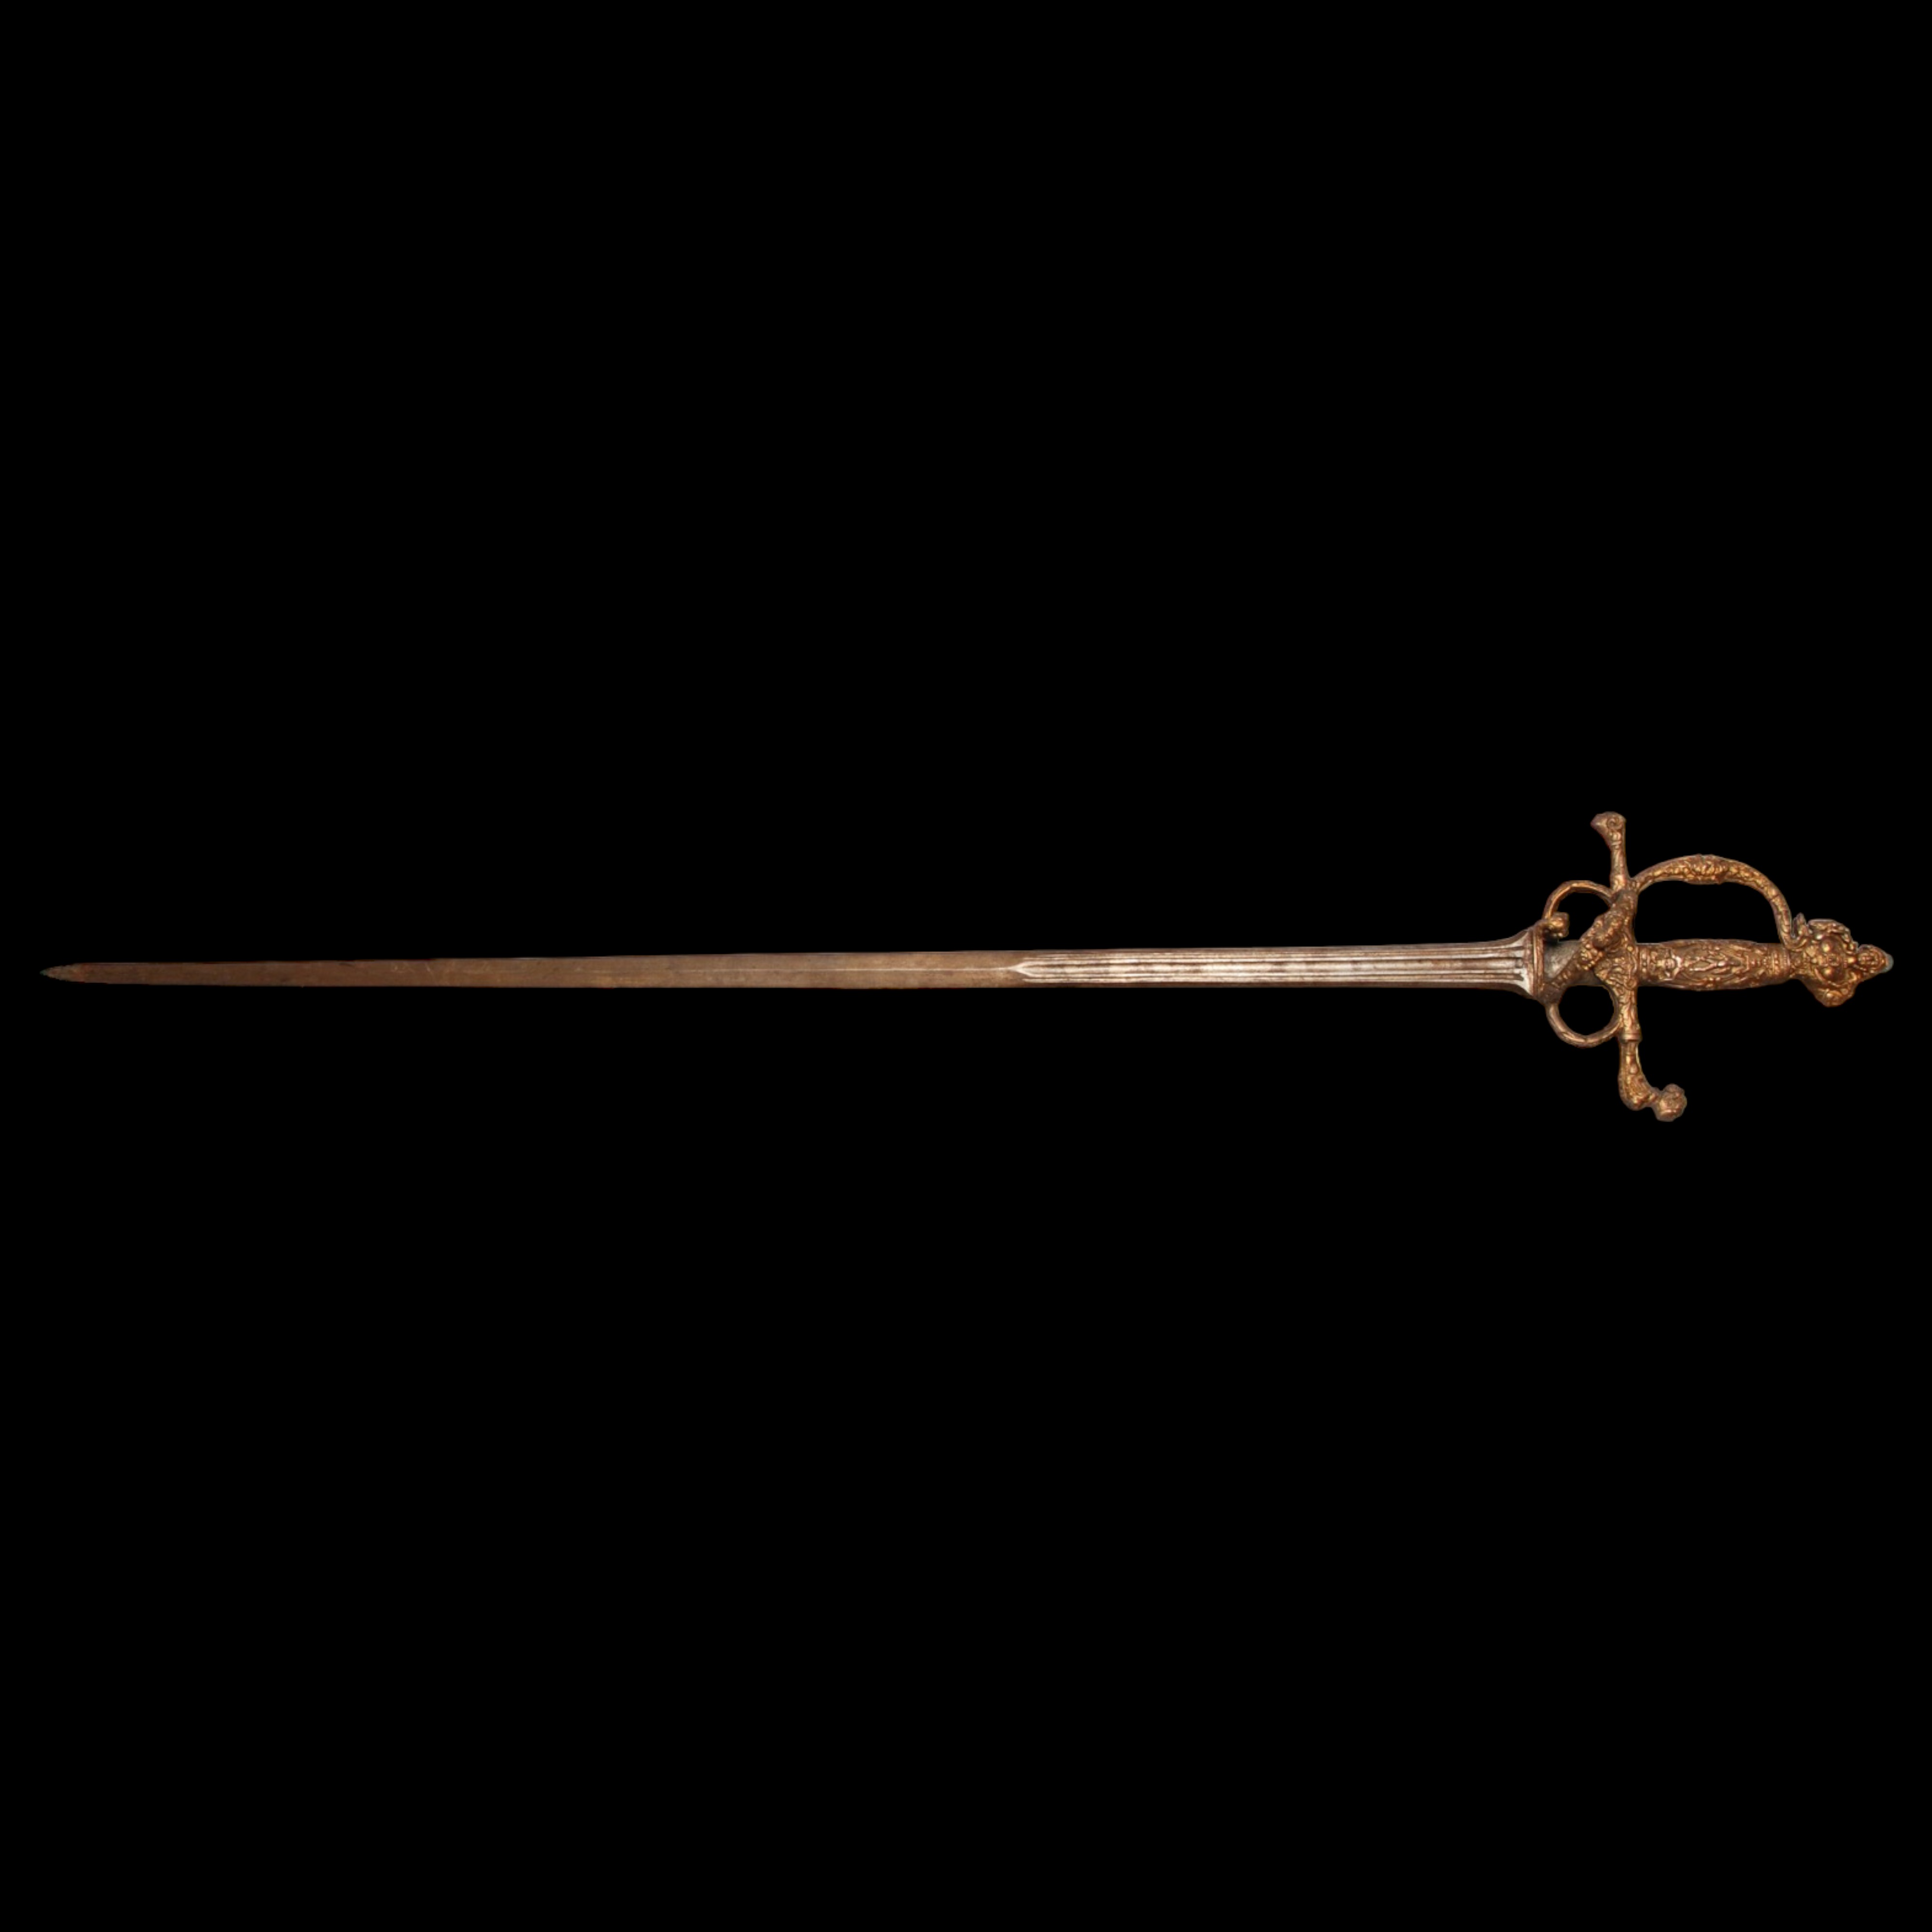 A Italian rapier in 17th century style. - Image 3 of 19